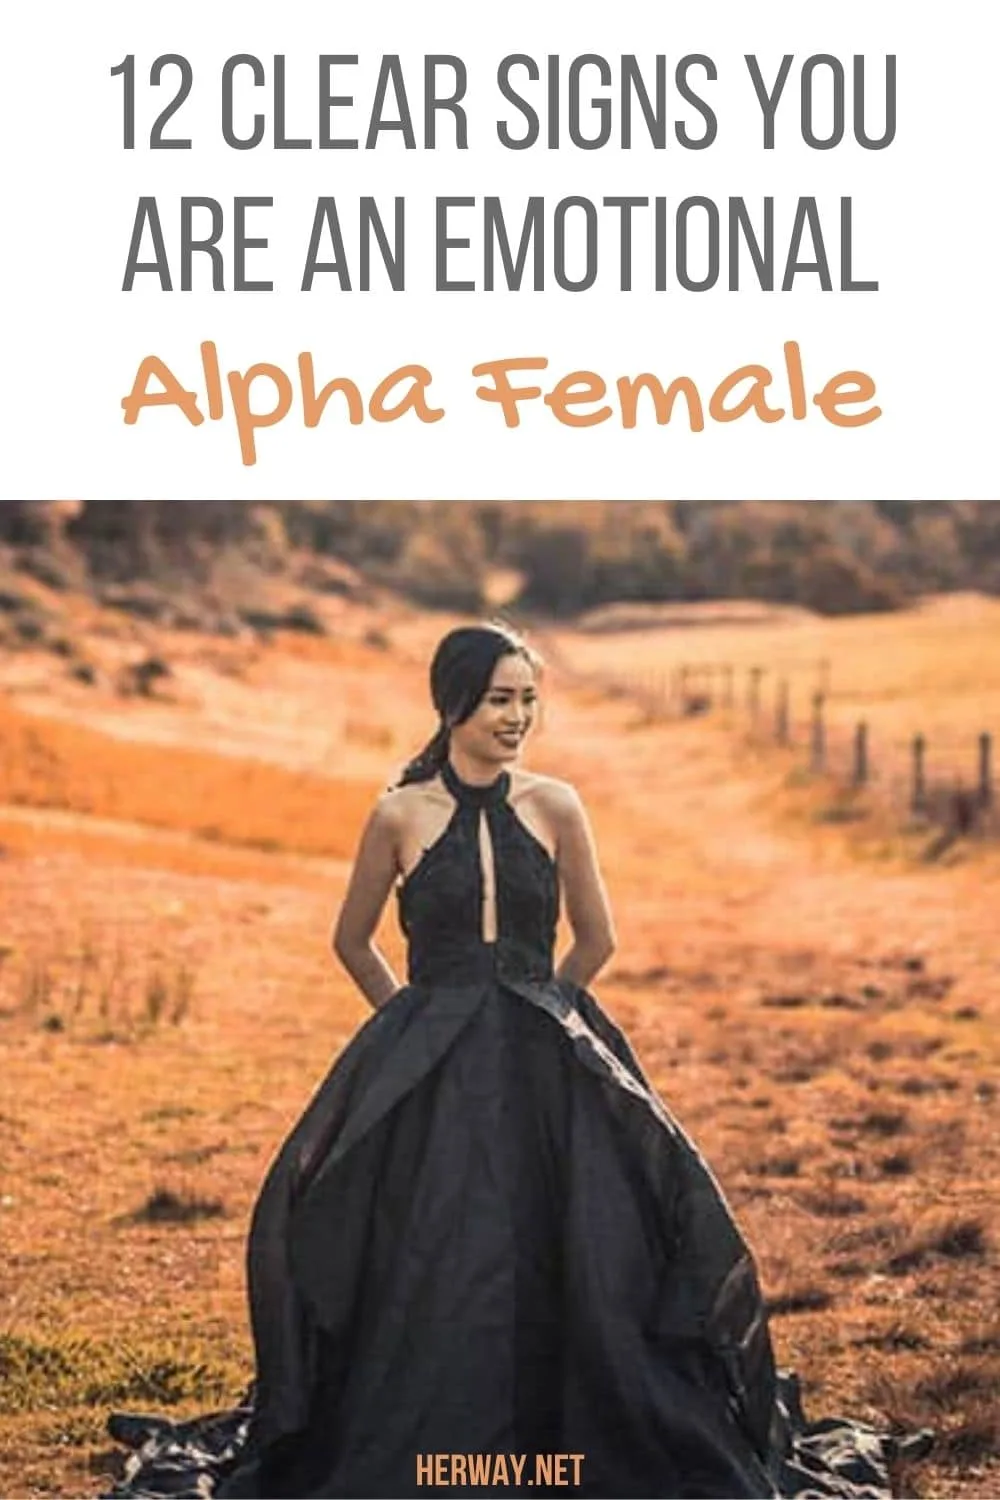 12 Clear Signs You Are An Emotional Alpha Female